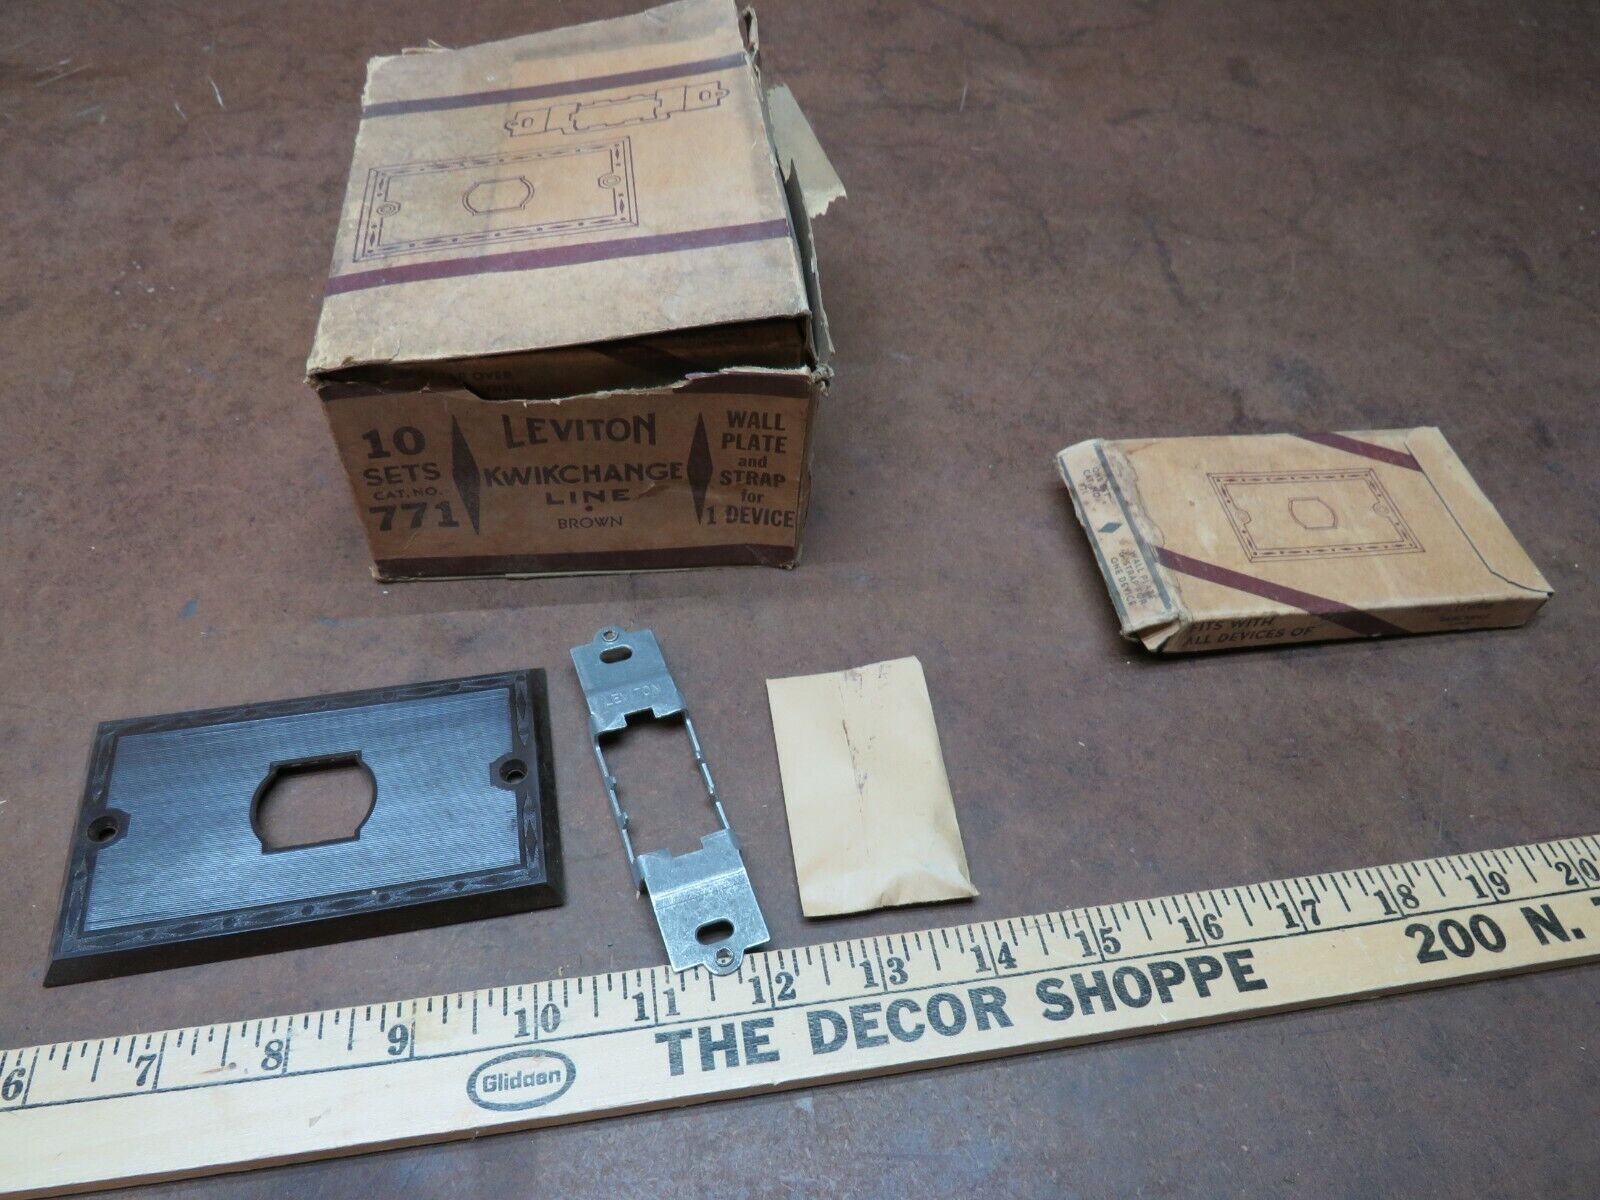 10 NOS Antique Electrical single Outlet Wall plate Strap LEVITON 771 Kwikchange